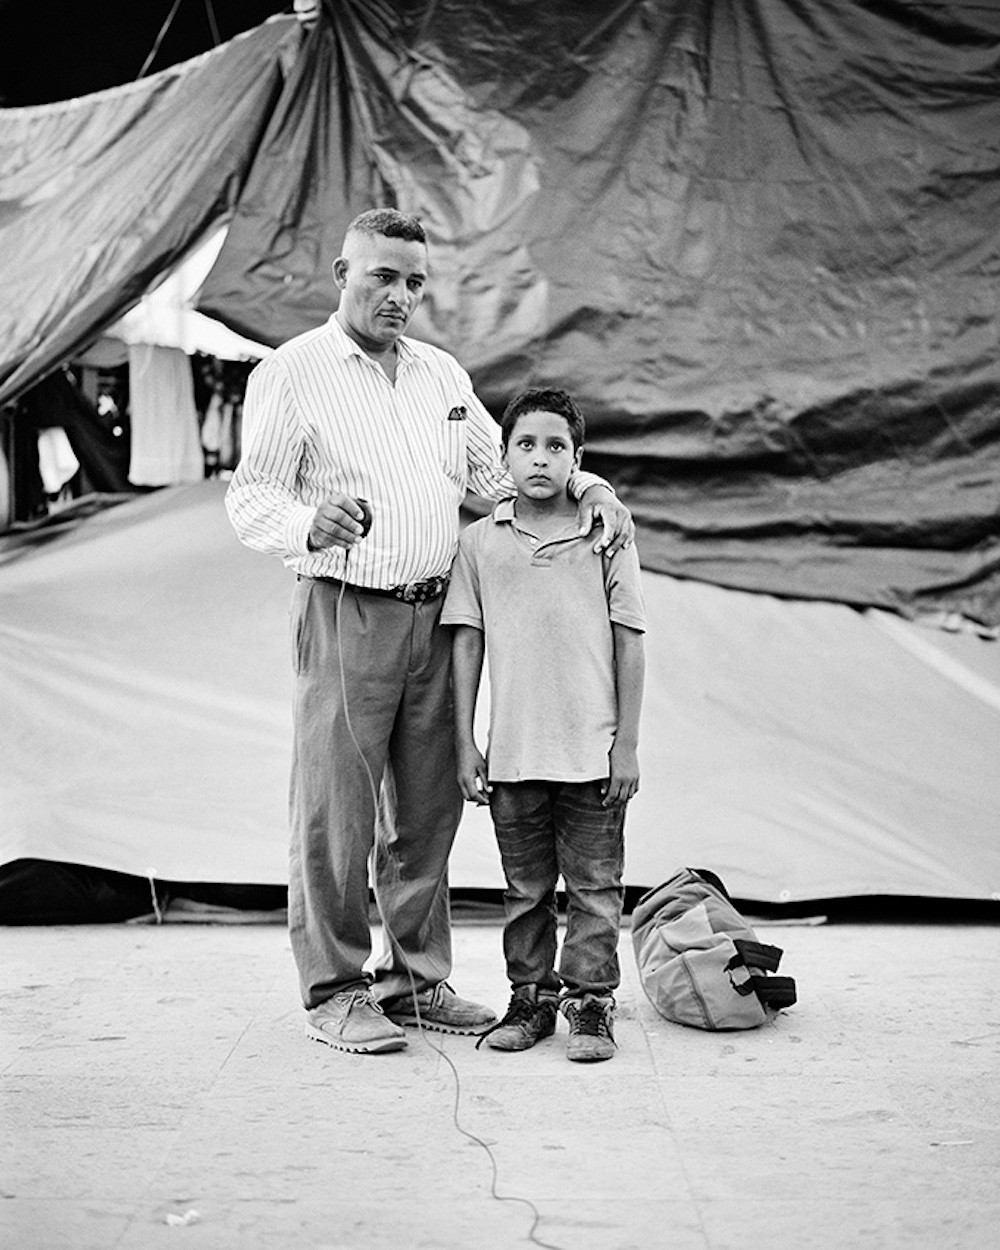 Edwardo Benavides, age 40 and his son Jonathon Benavides Reyes, age 9, are migrants from La Union, El Salvador. They took a portrait at an informal migrant camp at a municipal park in Reynosa, Tamaulipas, Mexico on 5 May 2021. Series Name: Migrantes. © Adam Ferguson, Australia, Photographer of the Year, Professional, Portraiture, 2022 Sony World Photography Awards